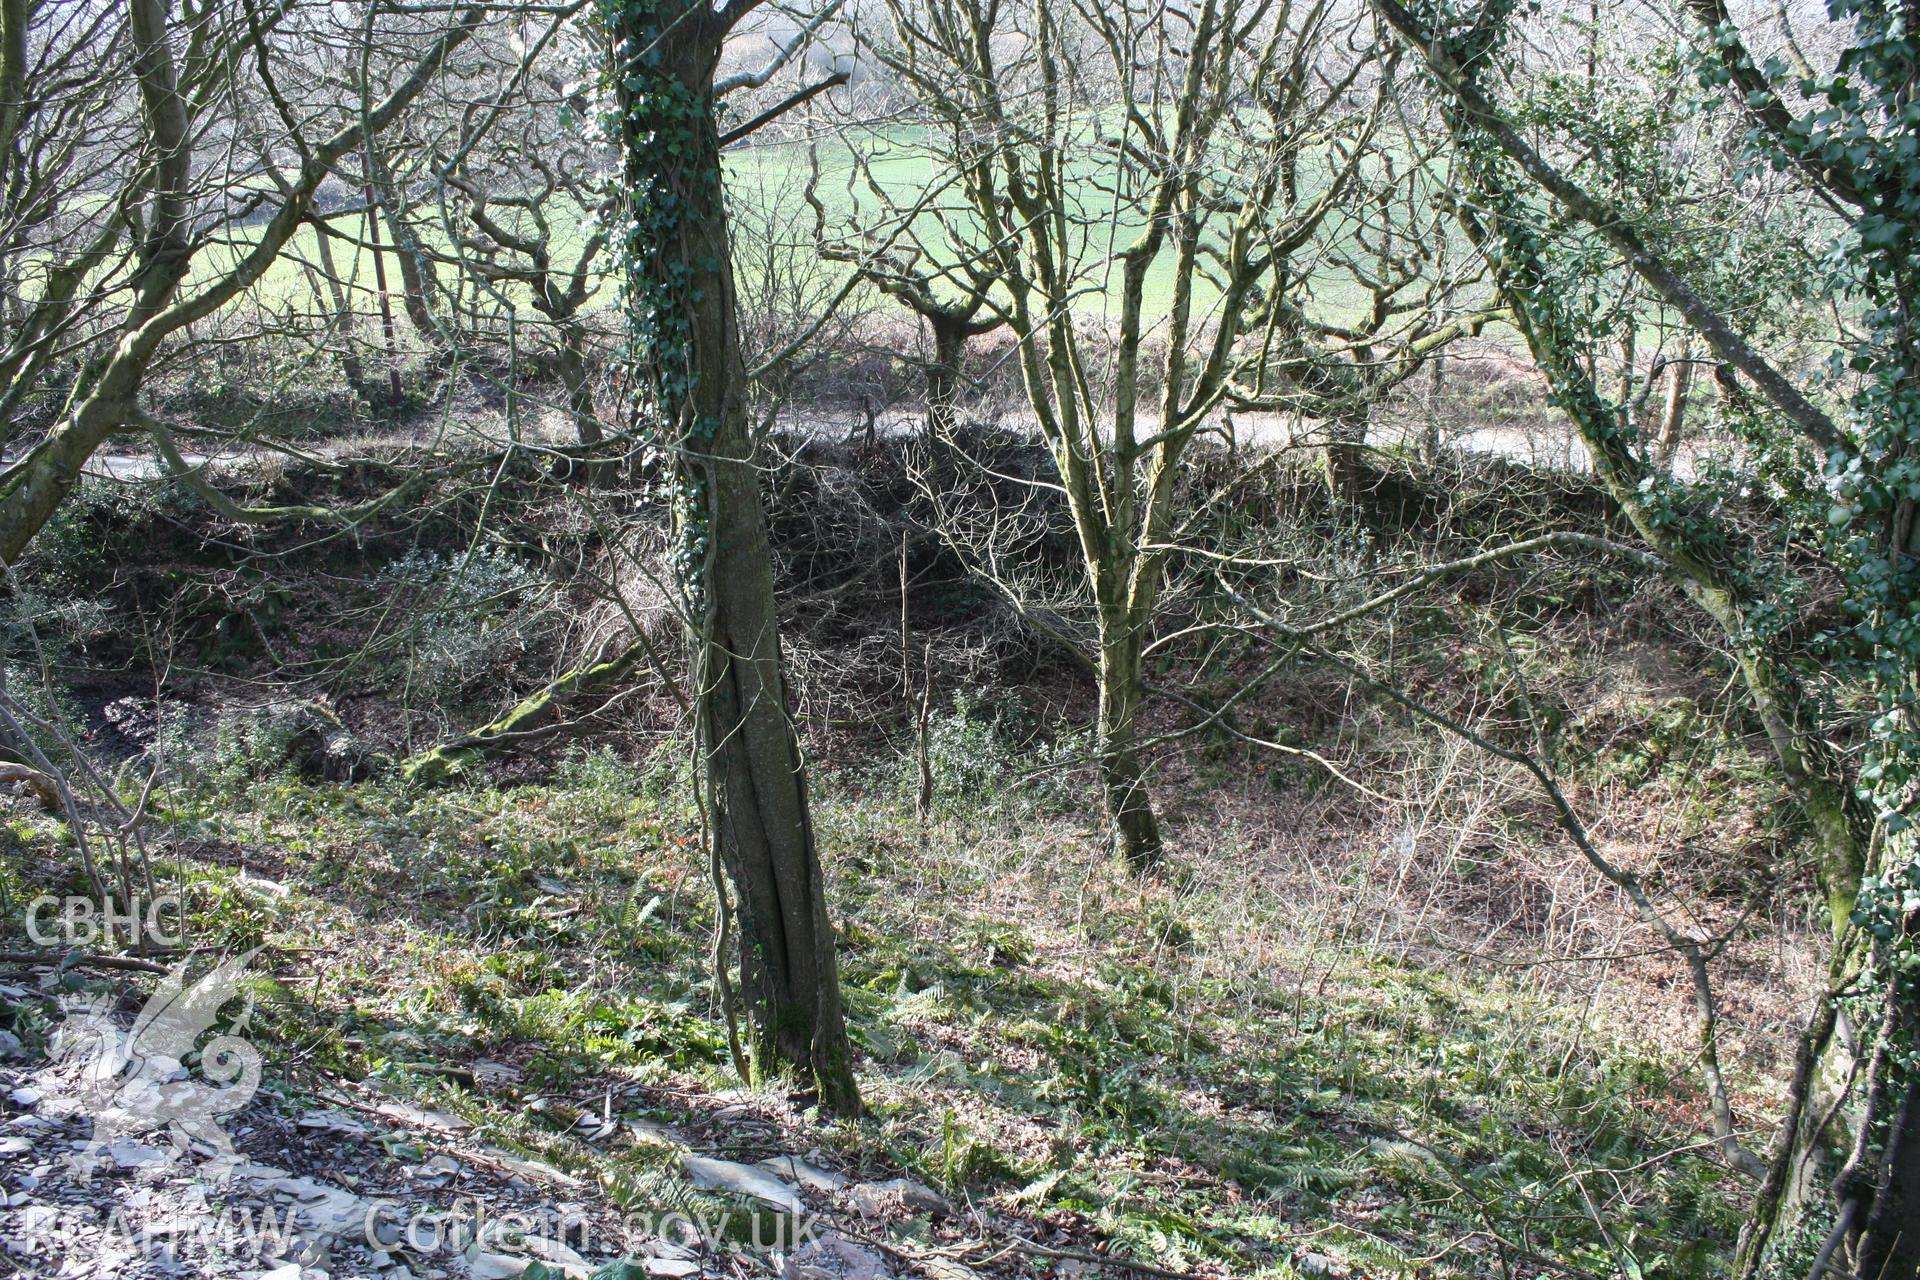 Nevern Castle, May 2010. View of the north-east corner of the outer castle ditch.